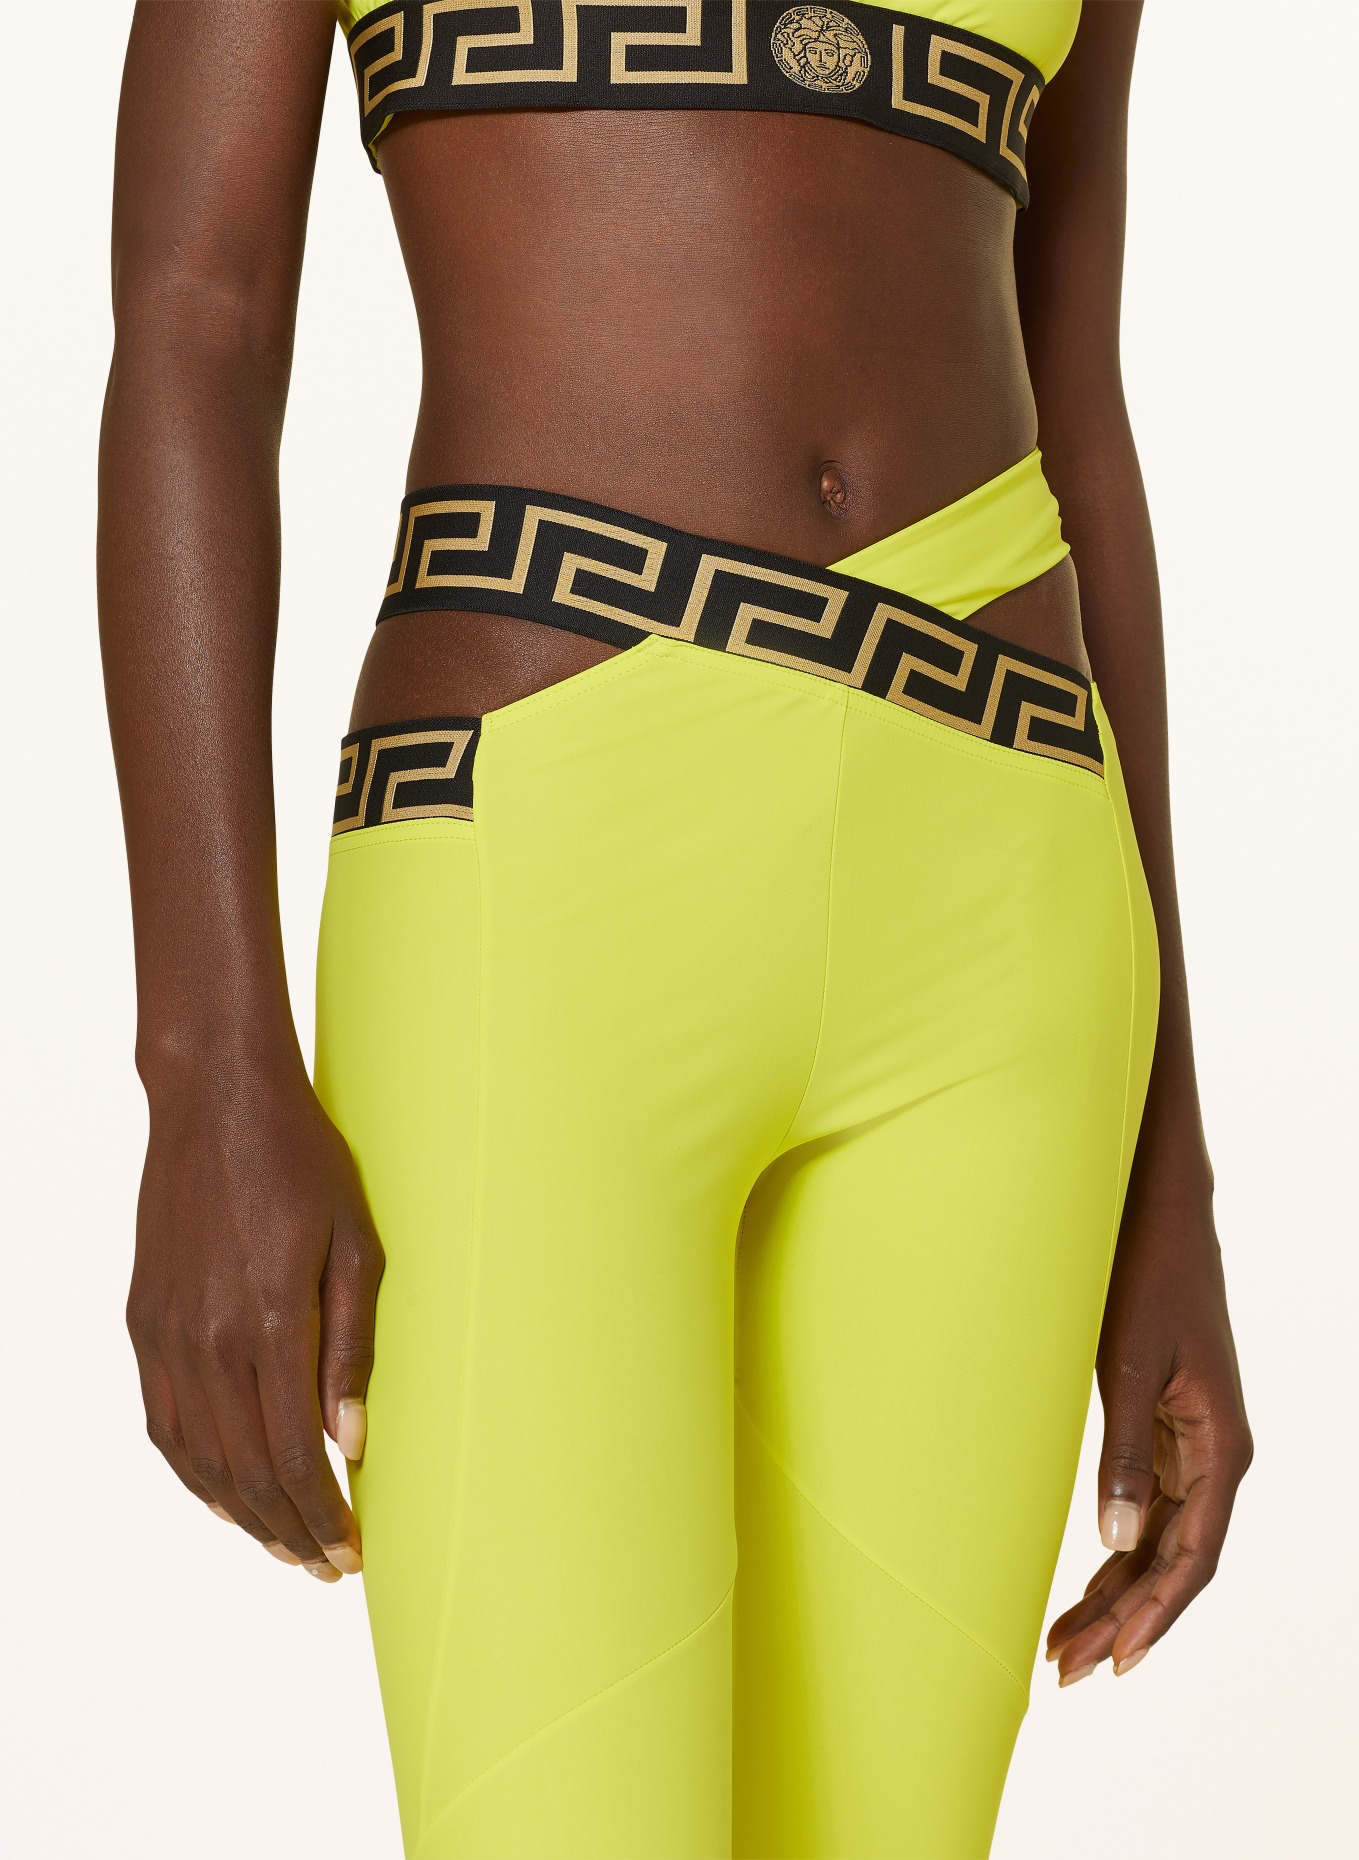 VERSACE Tights with cut-out, Color: NEON YELLOW/ BLACK/ GOLD (Image 5)